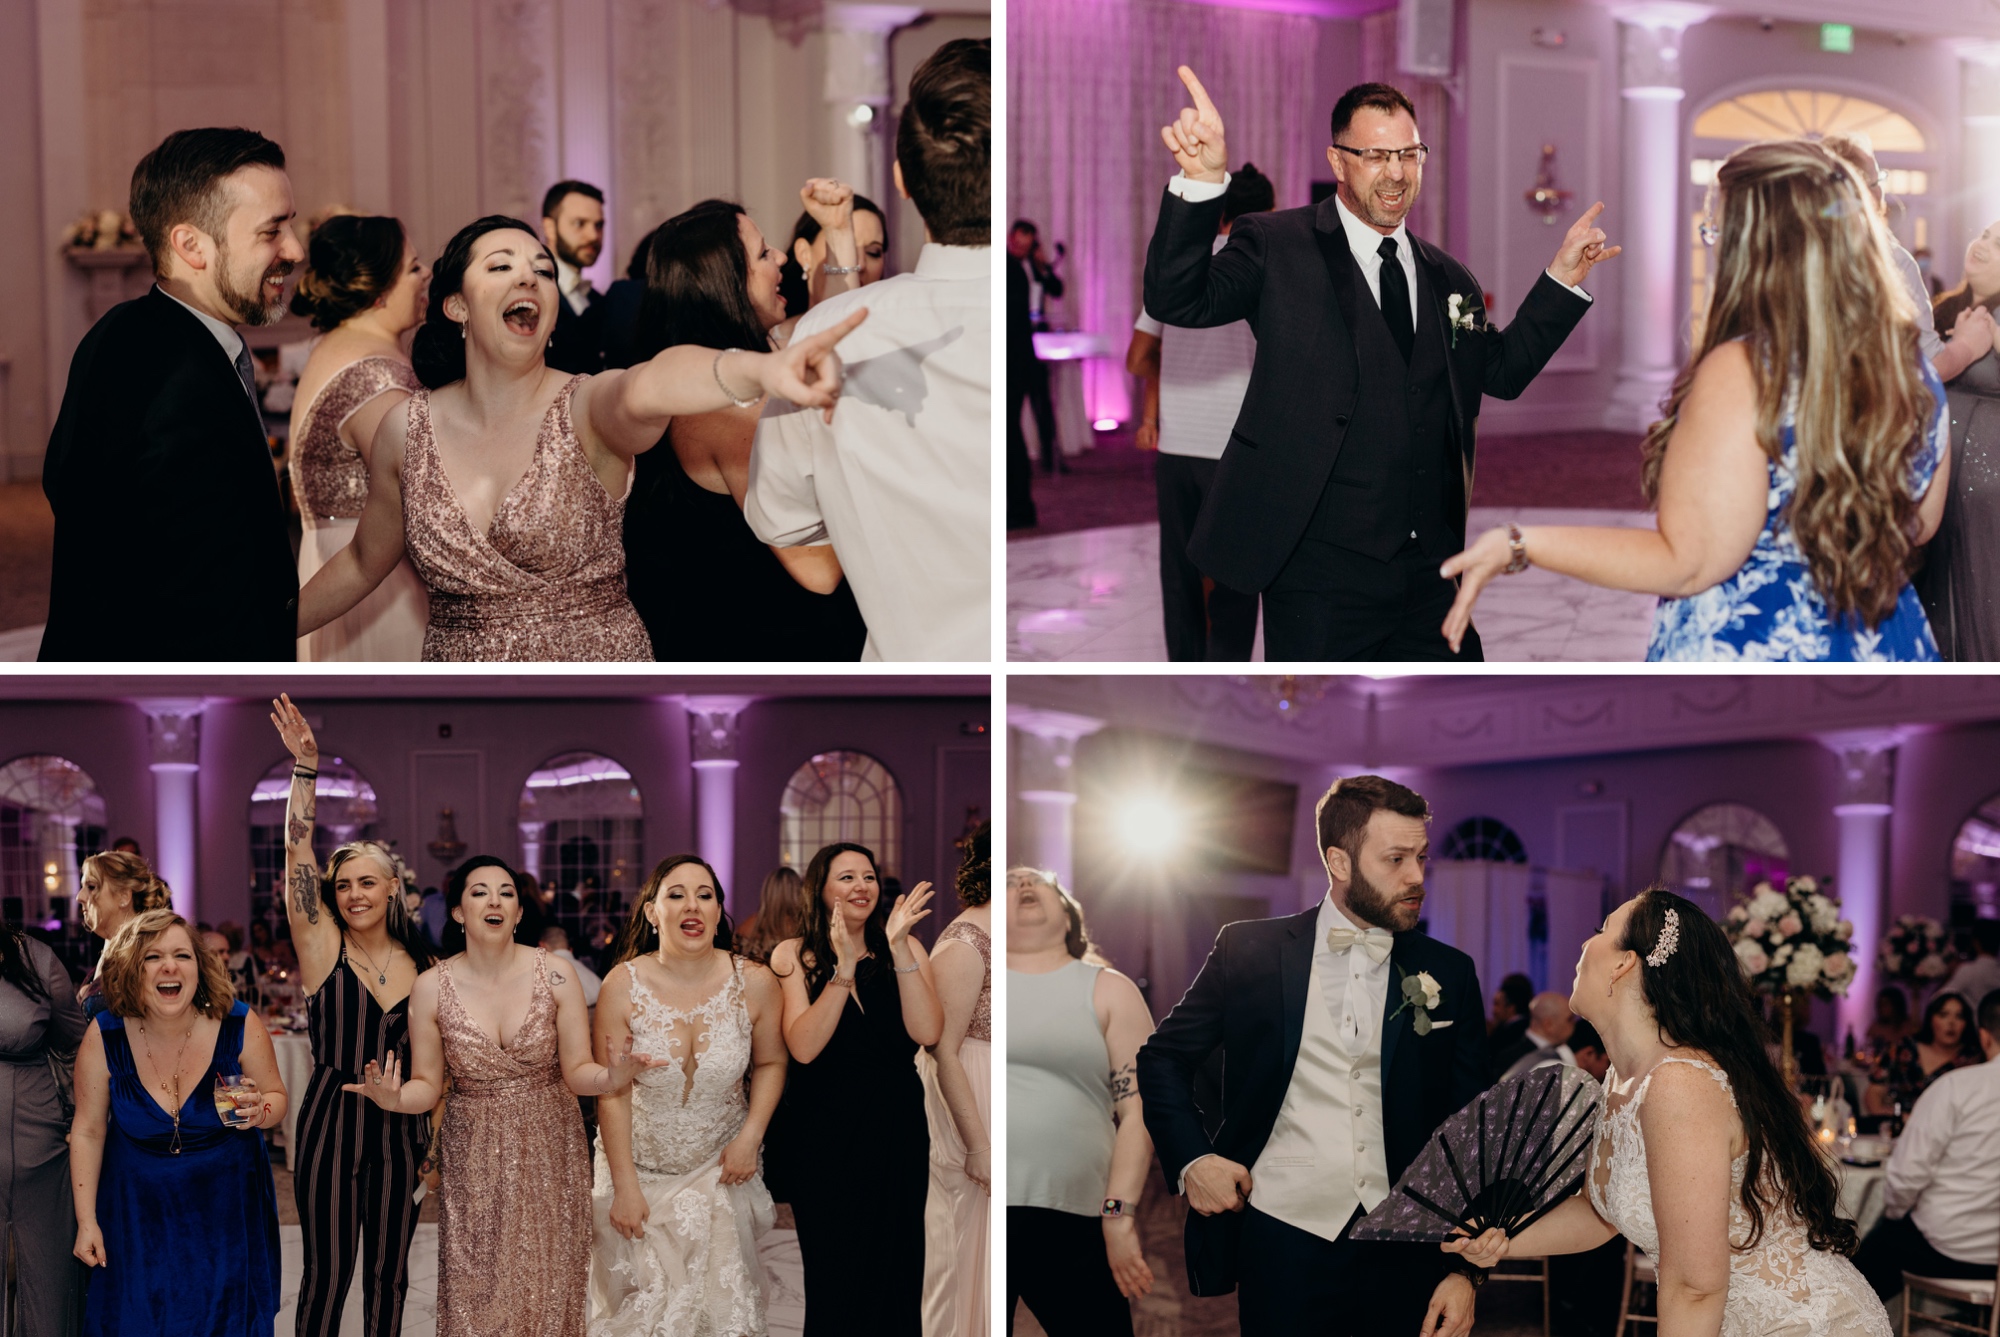 guests dancing during a reception at a wedding at valley regency in new jersey